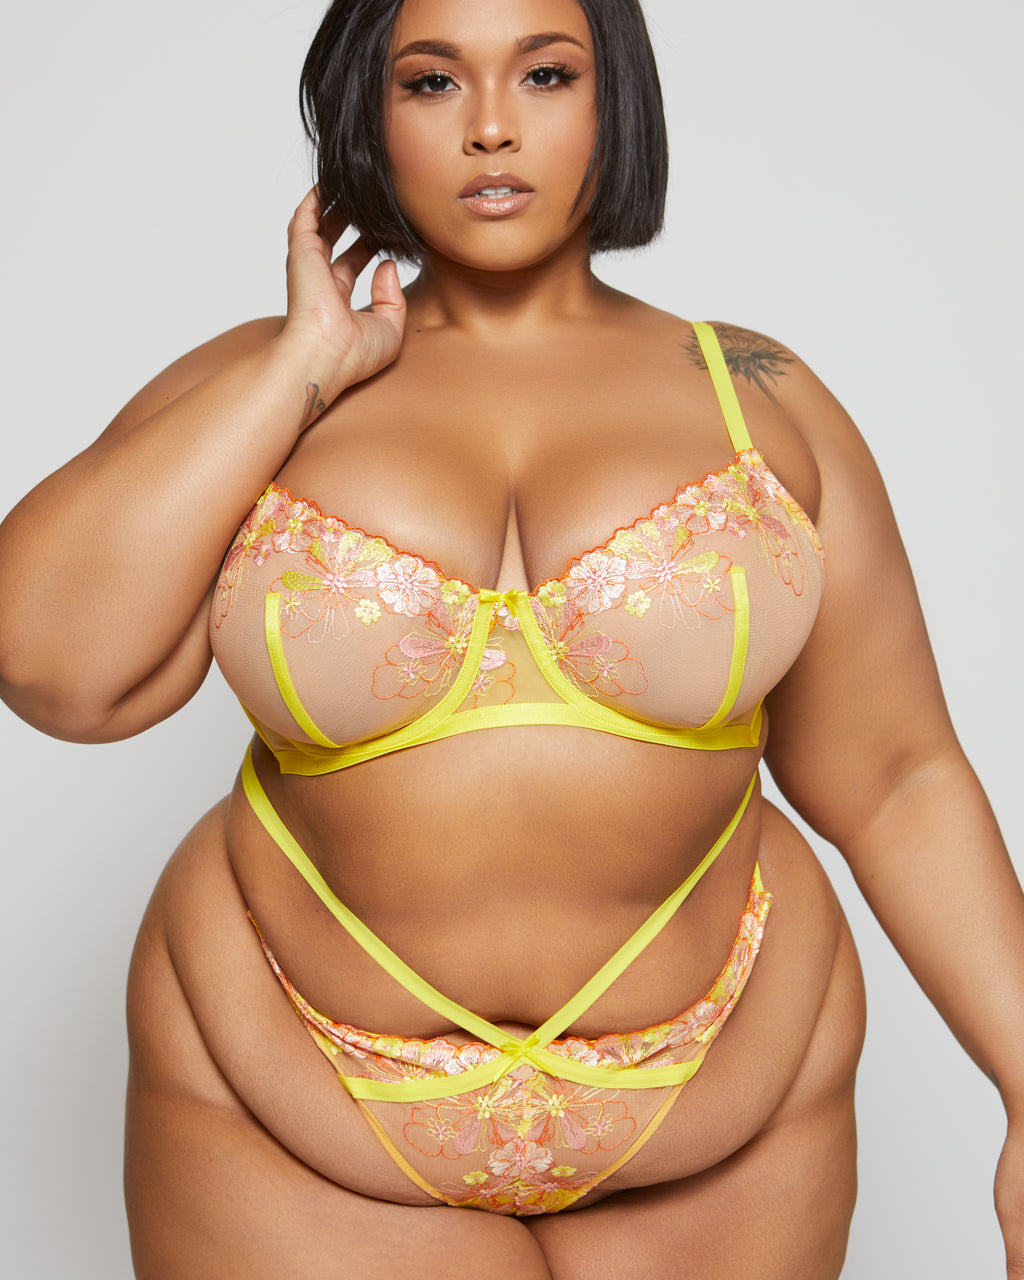 lemon yellow embroidered floral bra and panty set curvy